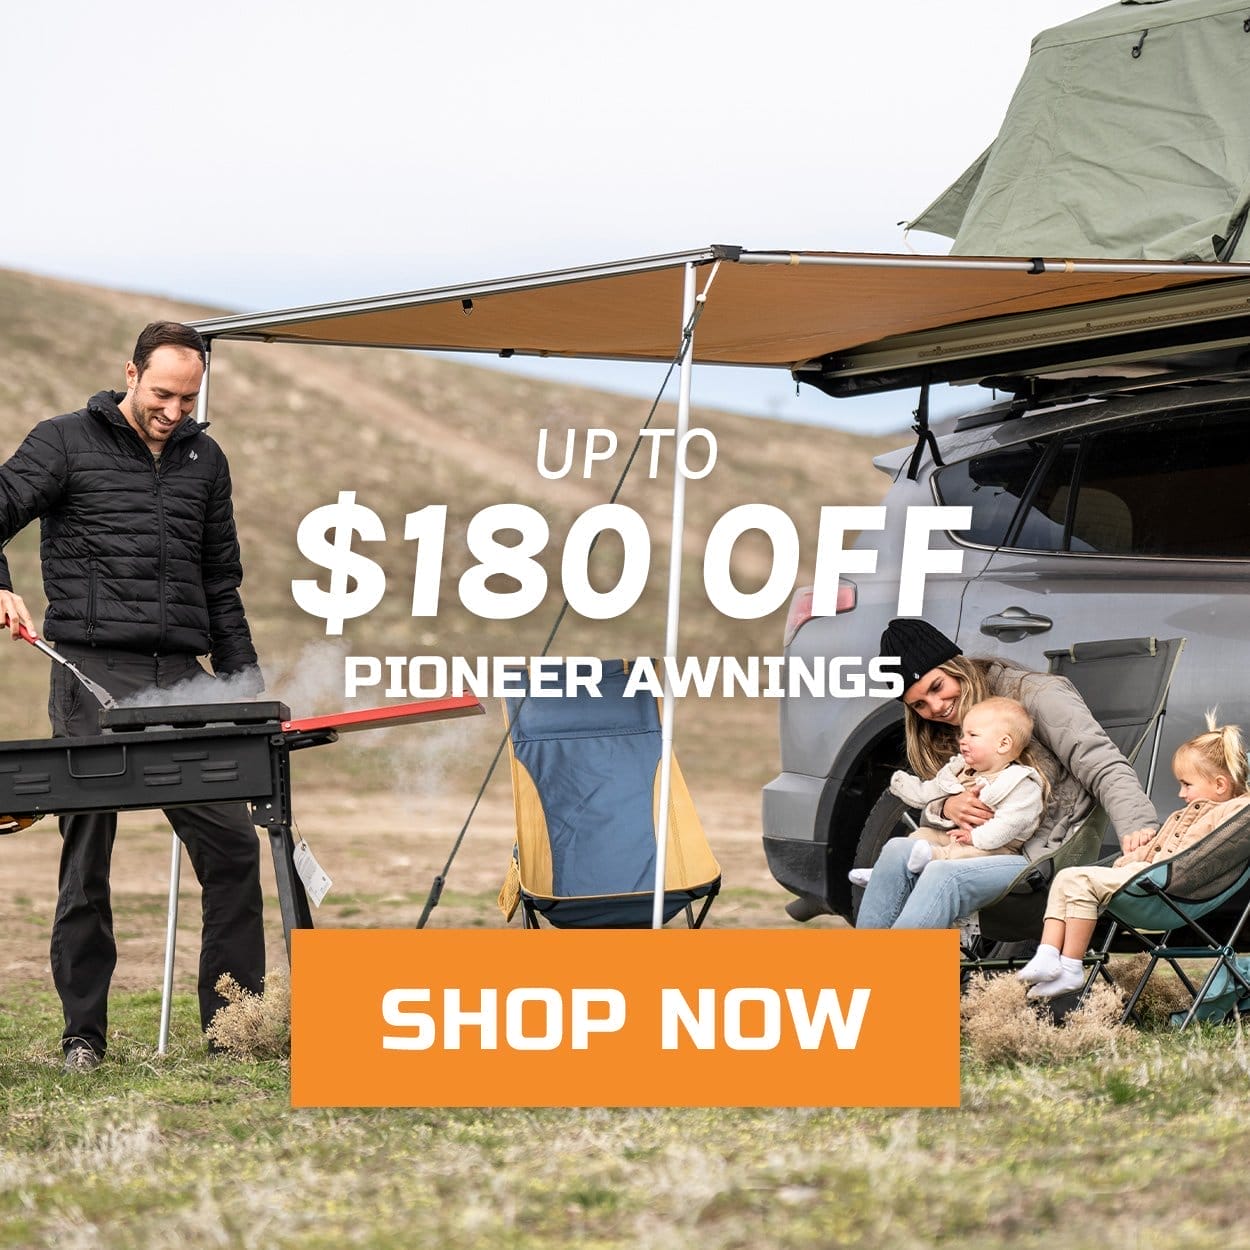 Up to \\$180 off Pioneer Awnings